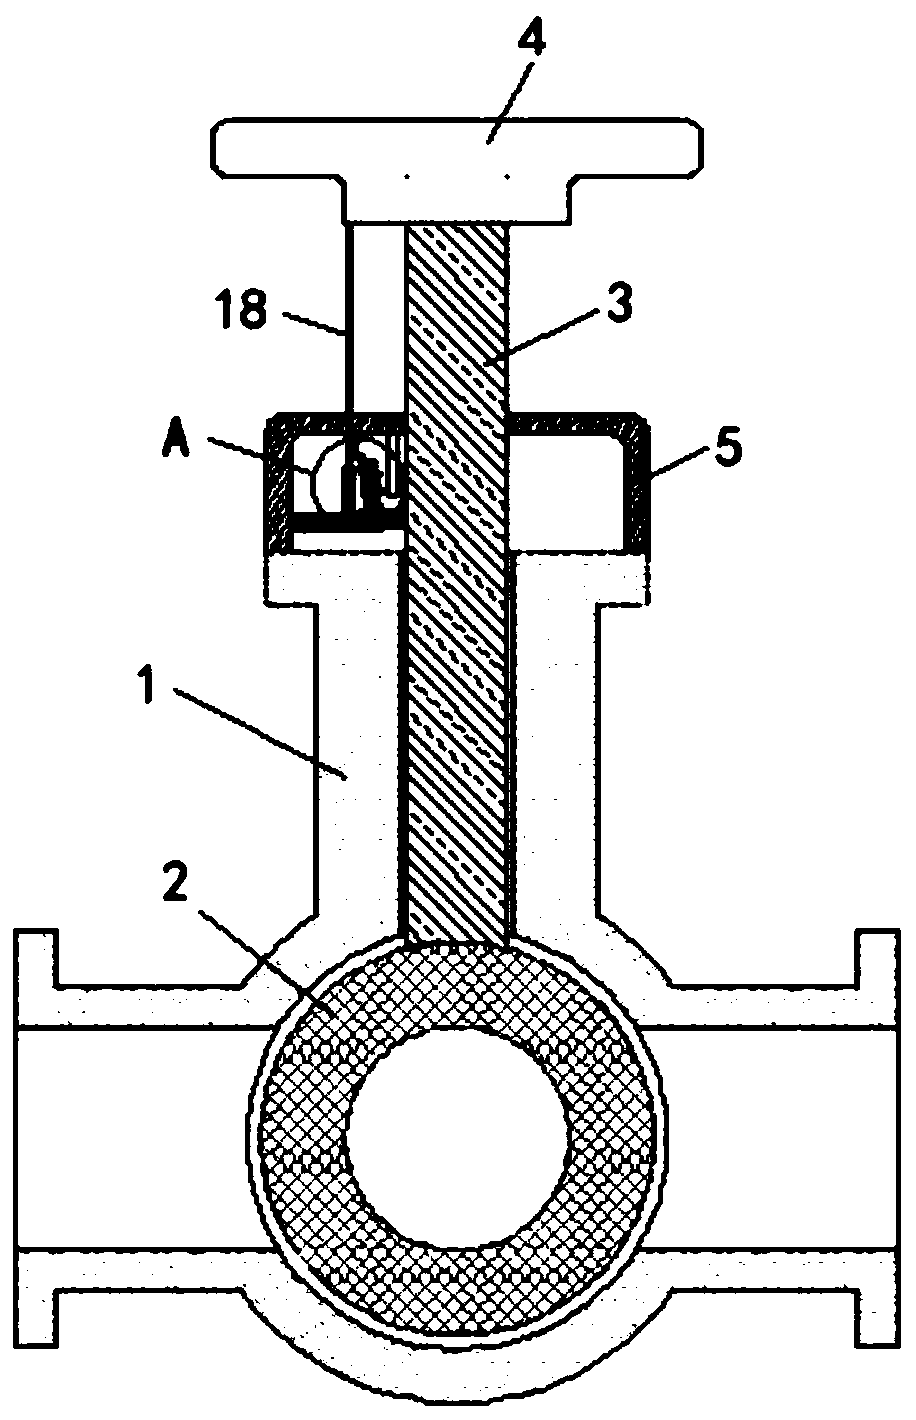 Ball valve protection device capable of preventing incomplete opening and closing